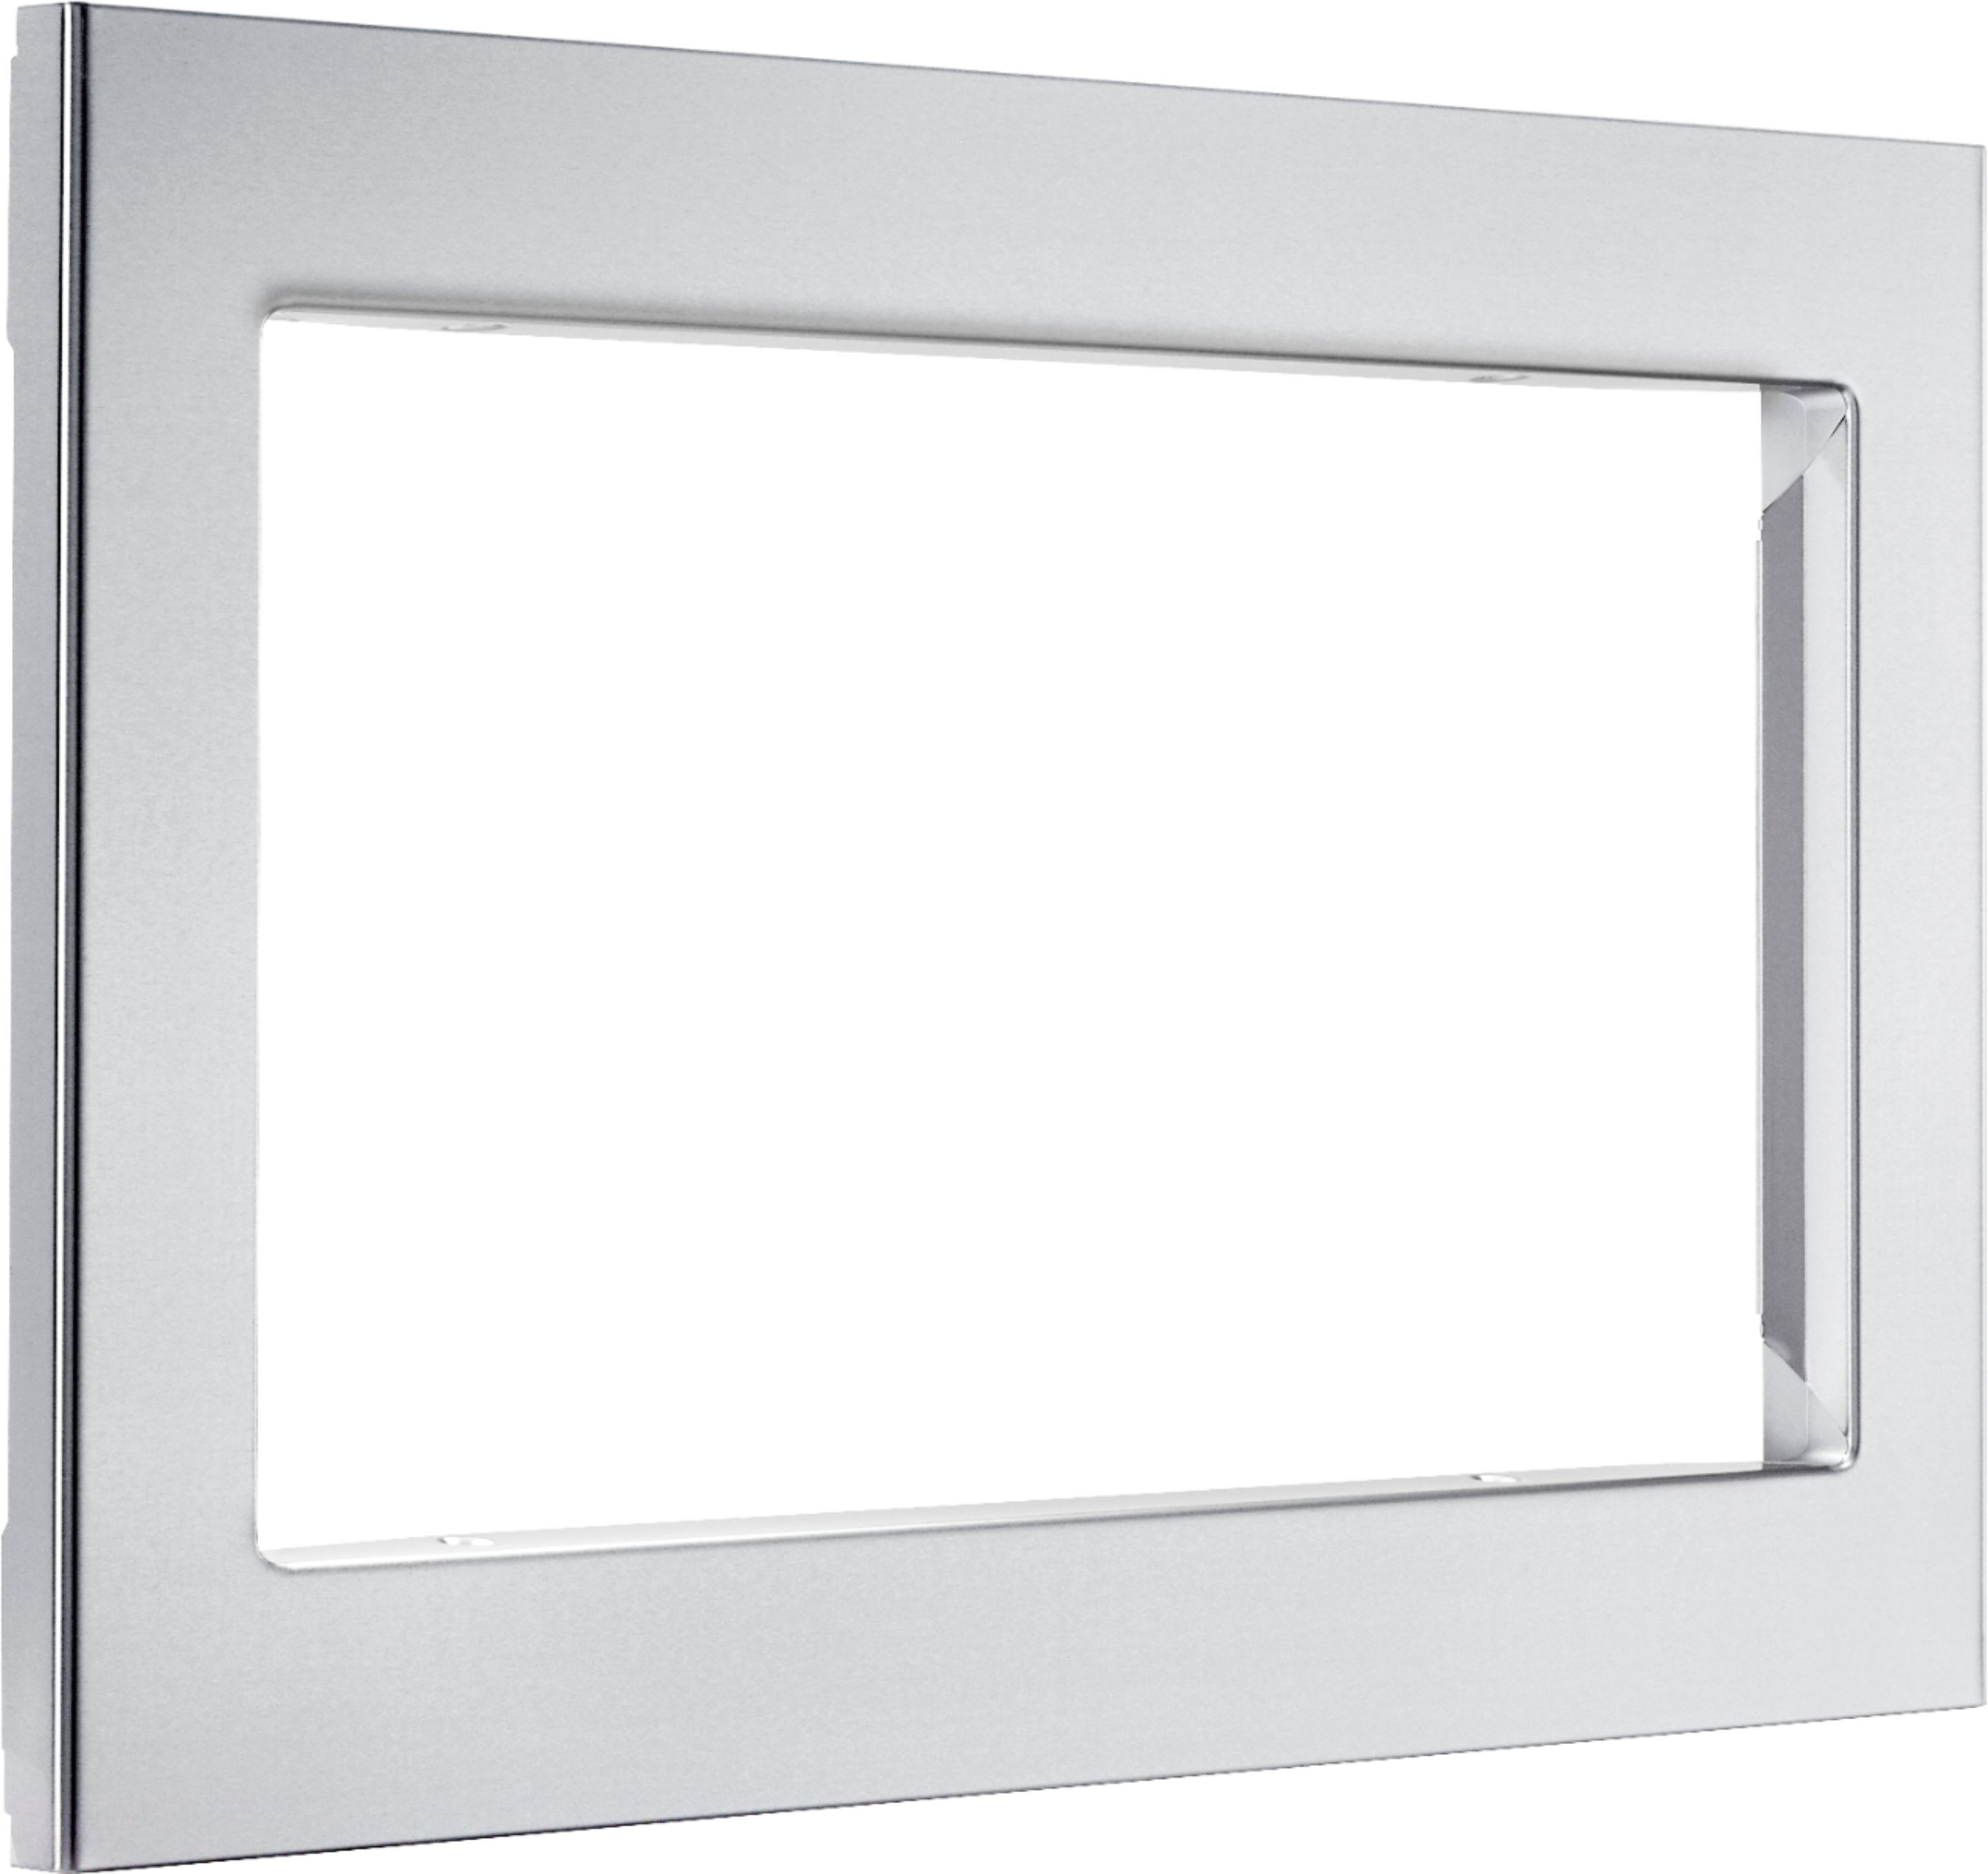 Angle View: 29.7" Trim Kit for LG Microwaves - Stainless Steel